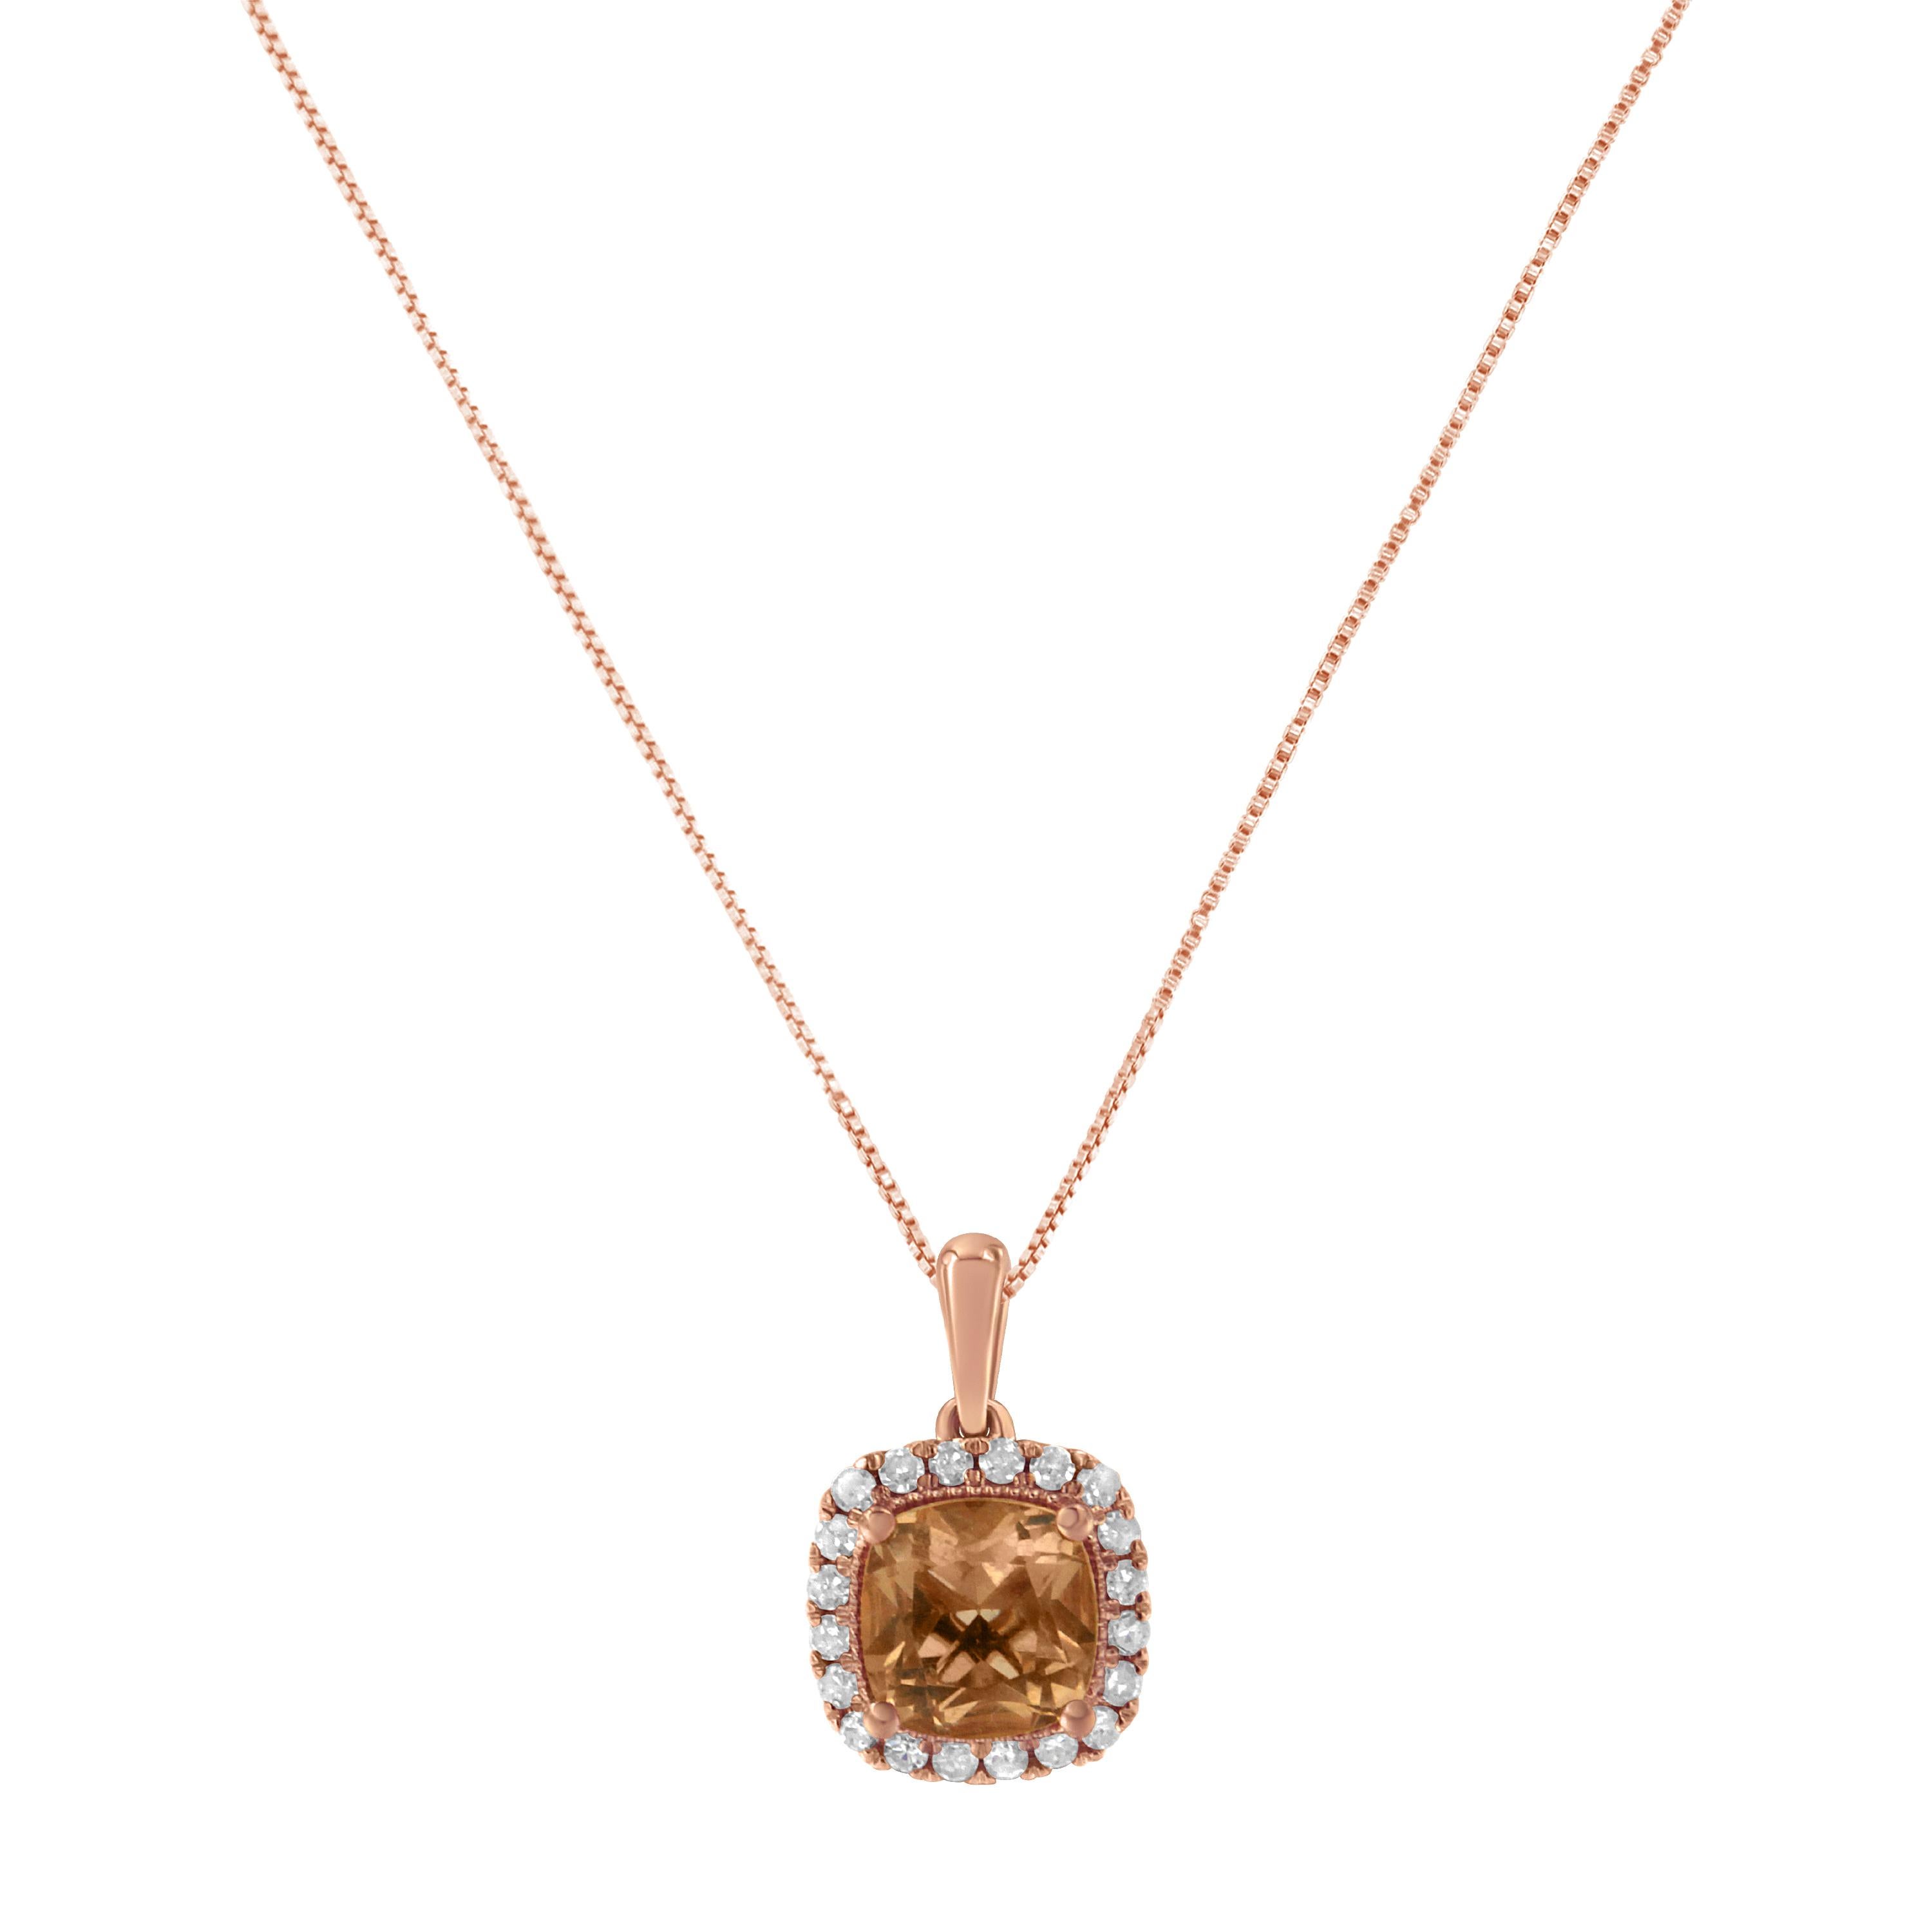 Modern and elegant, this 10k rose gold morganite pendant necklace commands attention. 1/4ct of natural, white round cut diamonds surround the stunning 8MM Created Peach Morganite gemstone. Suspended from a cable chain, this necklace has just the